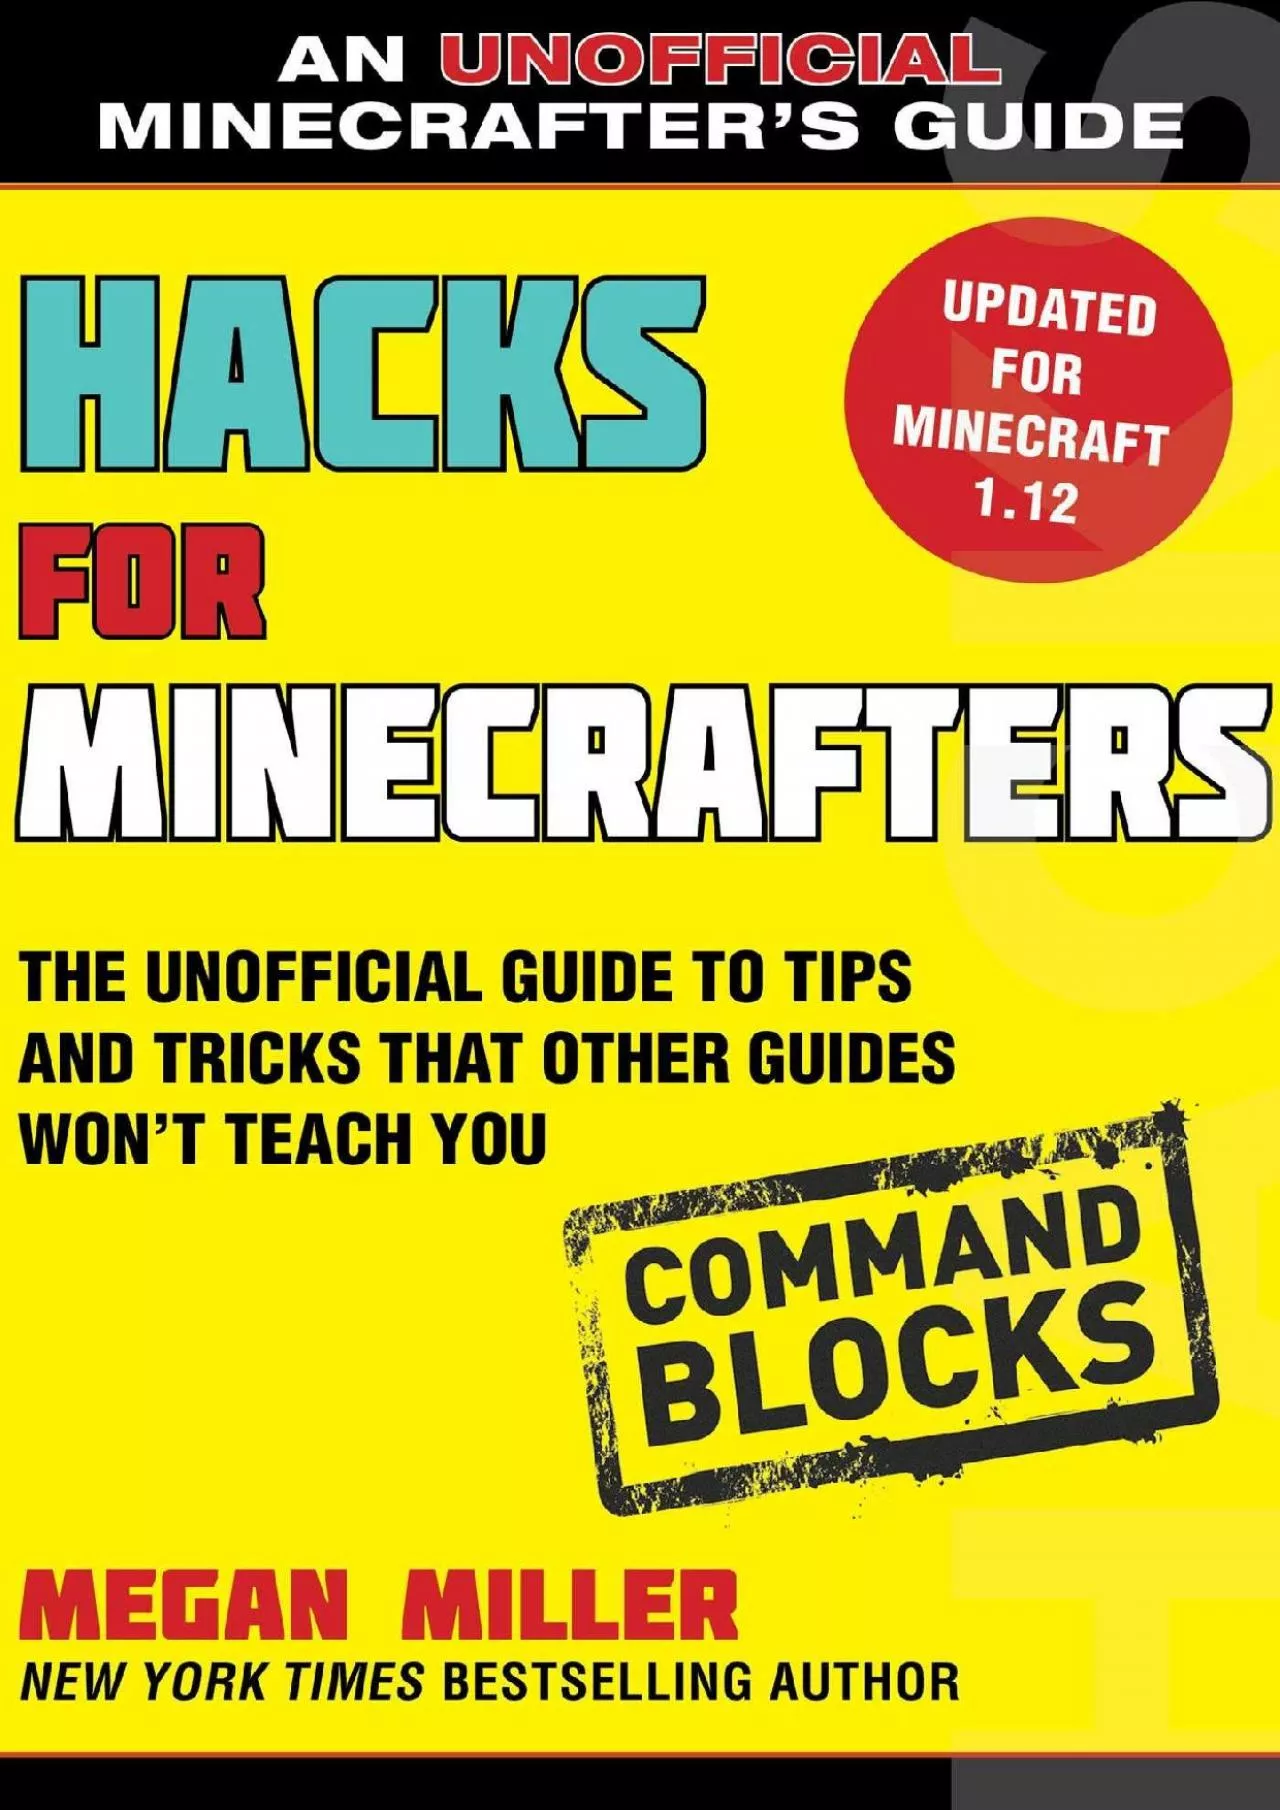 (BOOS)-Hacks for Minecrafters: Command Blocks: The Unofficial Guide to Tips and Tricks